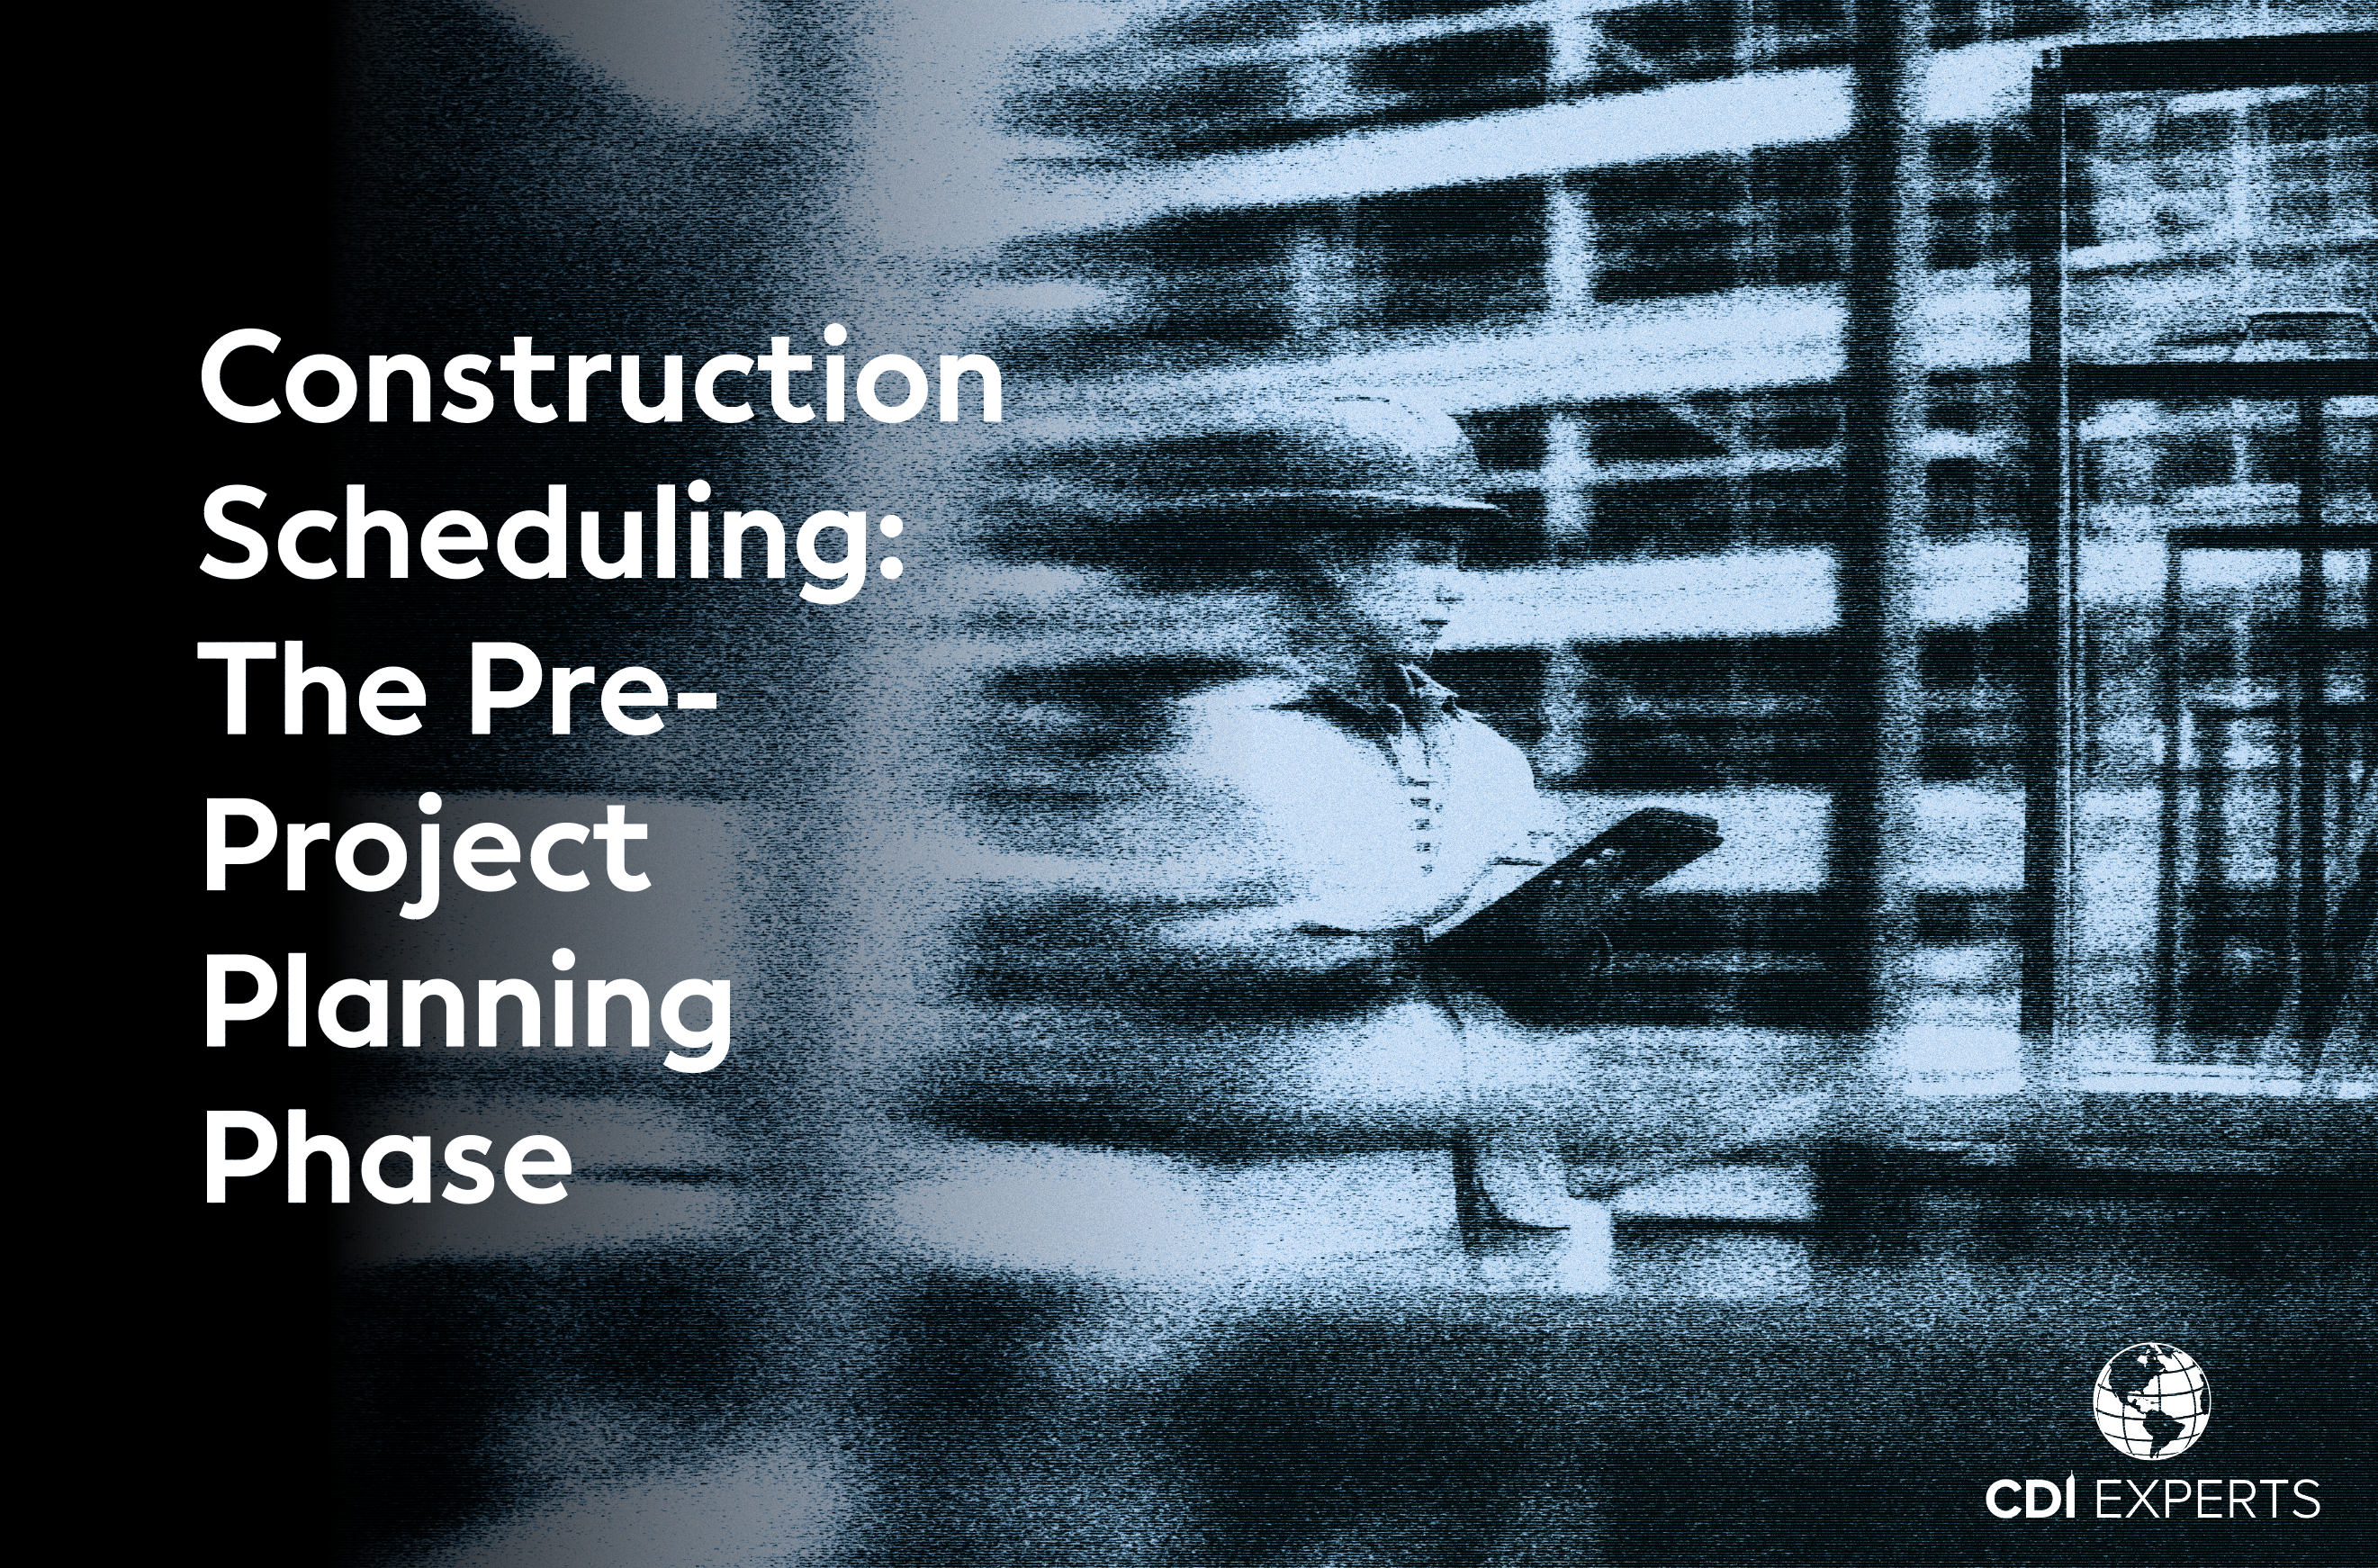 Construction scheduling: the pre-project planning phase